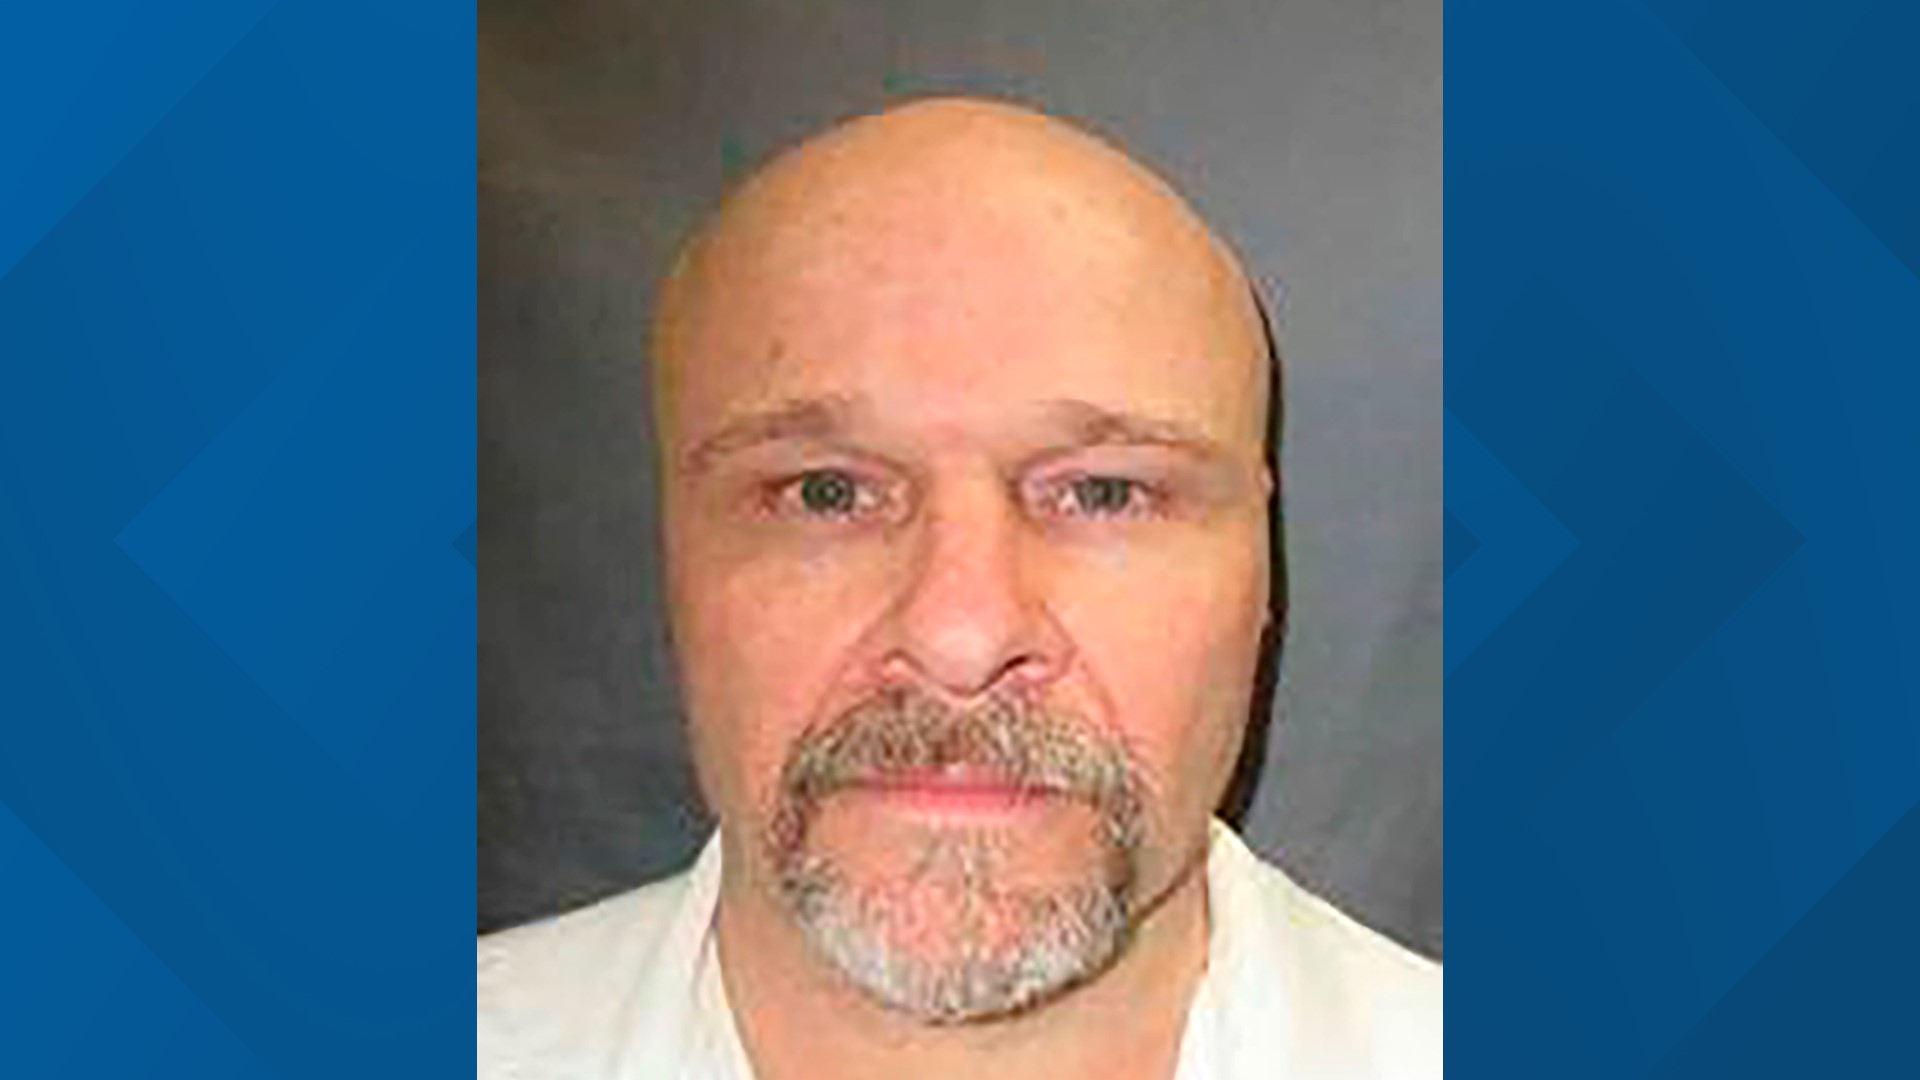 Rick Rhoades beat and stabbed the victims the day after he was released from prison on parole, court documents say. His attorneys claim he didn't get a fair trial.